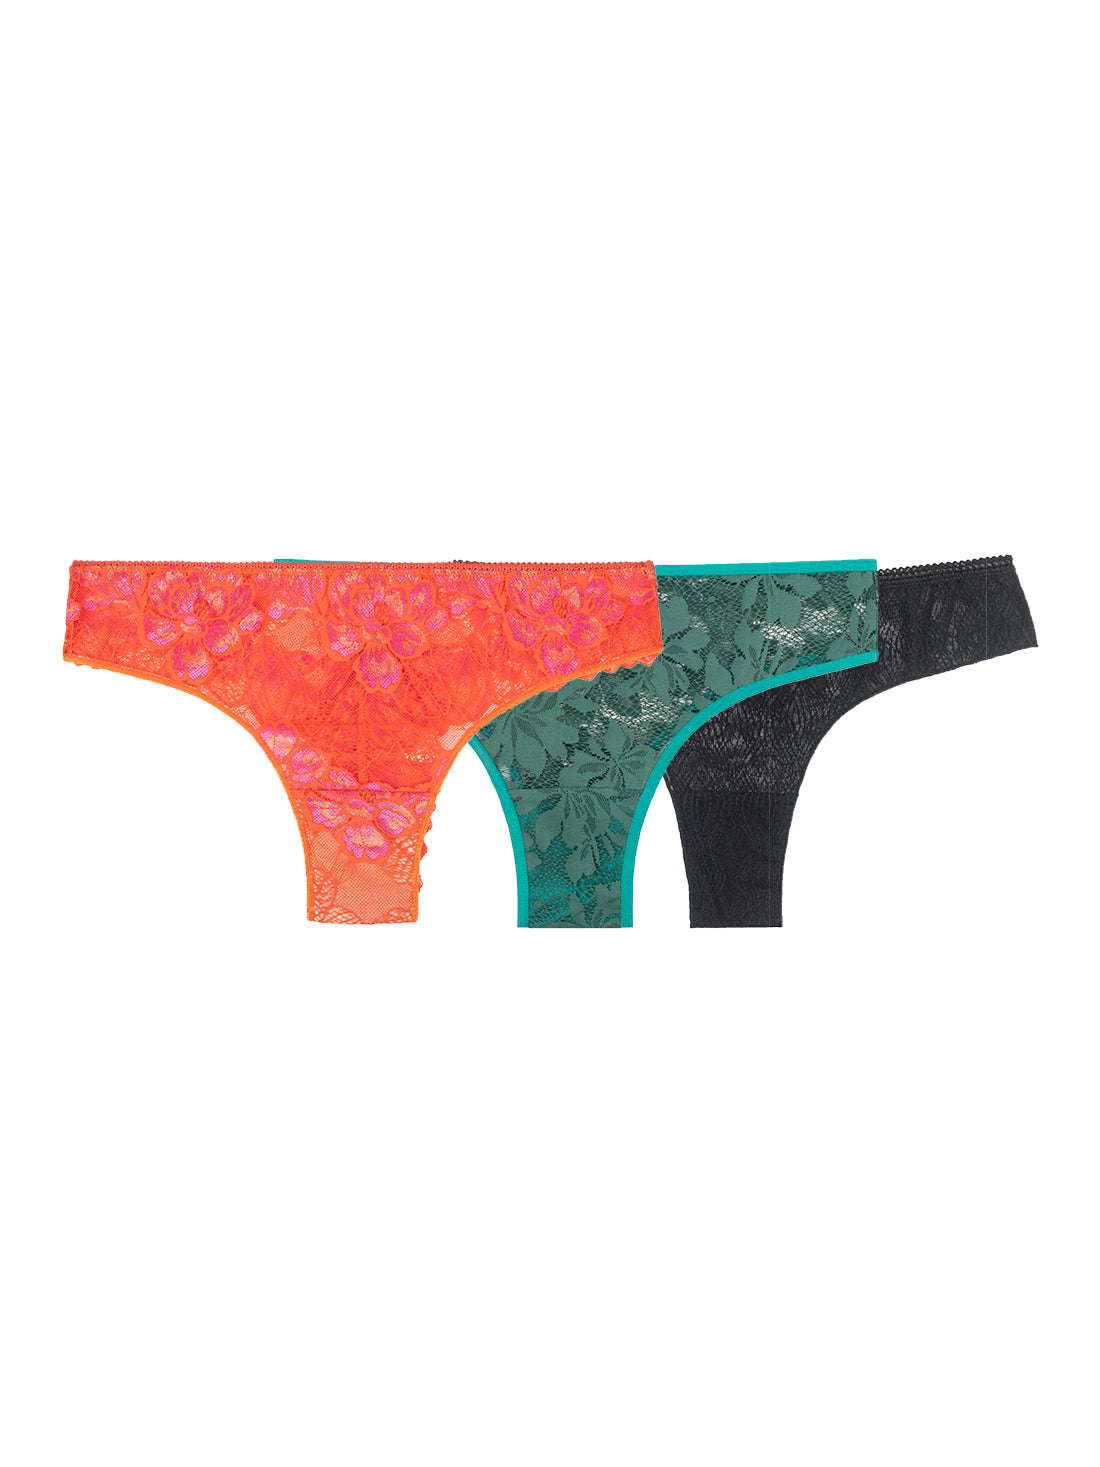 A bundle of 3 thongs: The Flora thong in Tangerine. The Elena Thong in Sage and The Esme Thong in Licorice